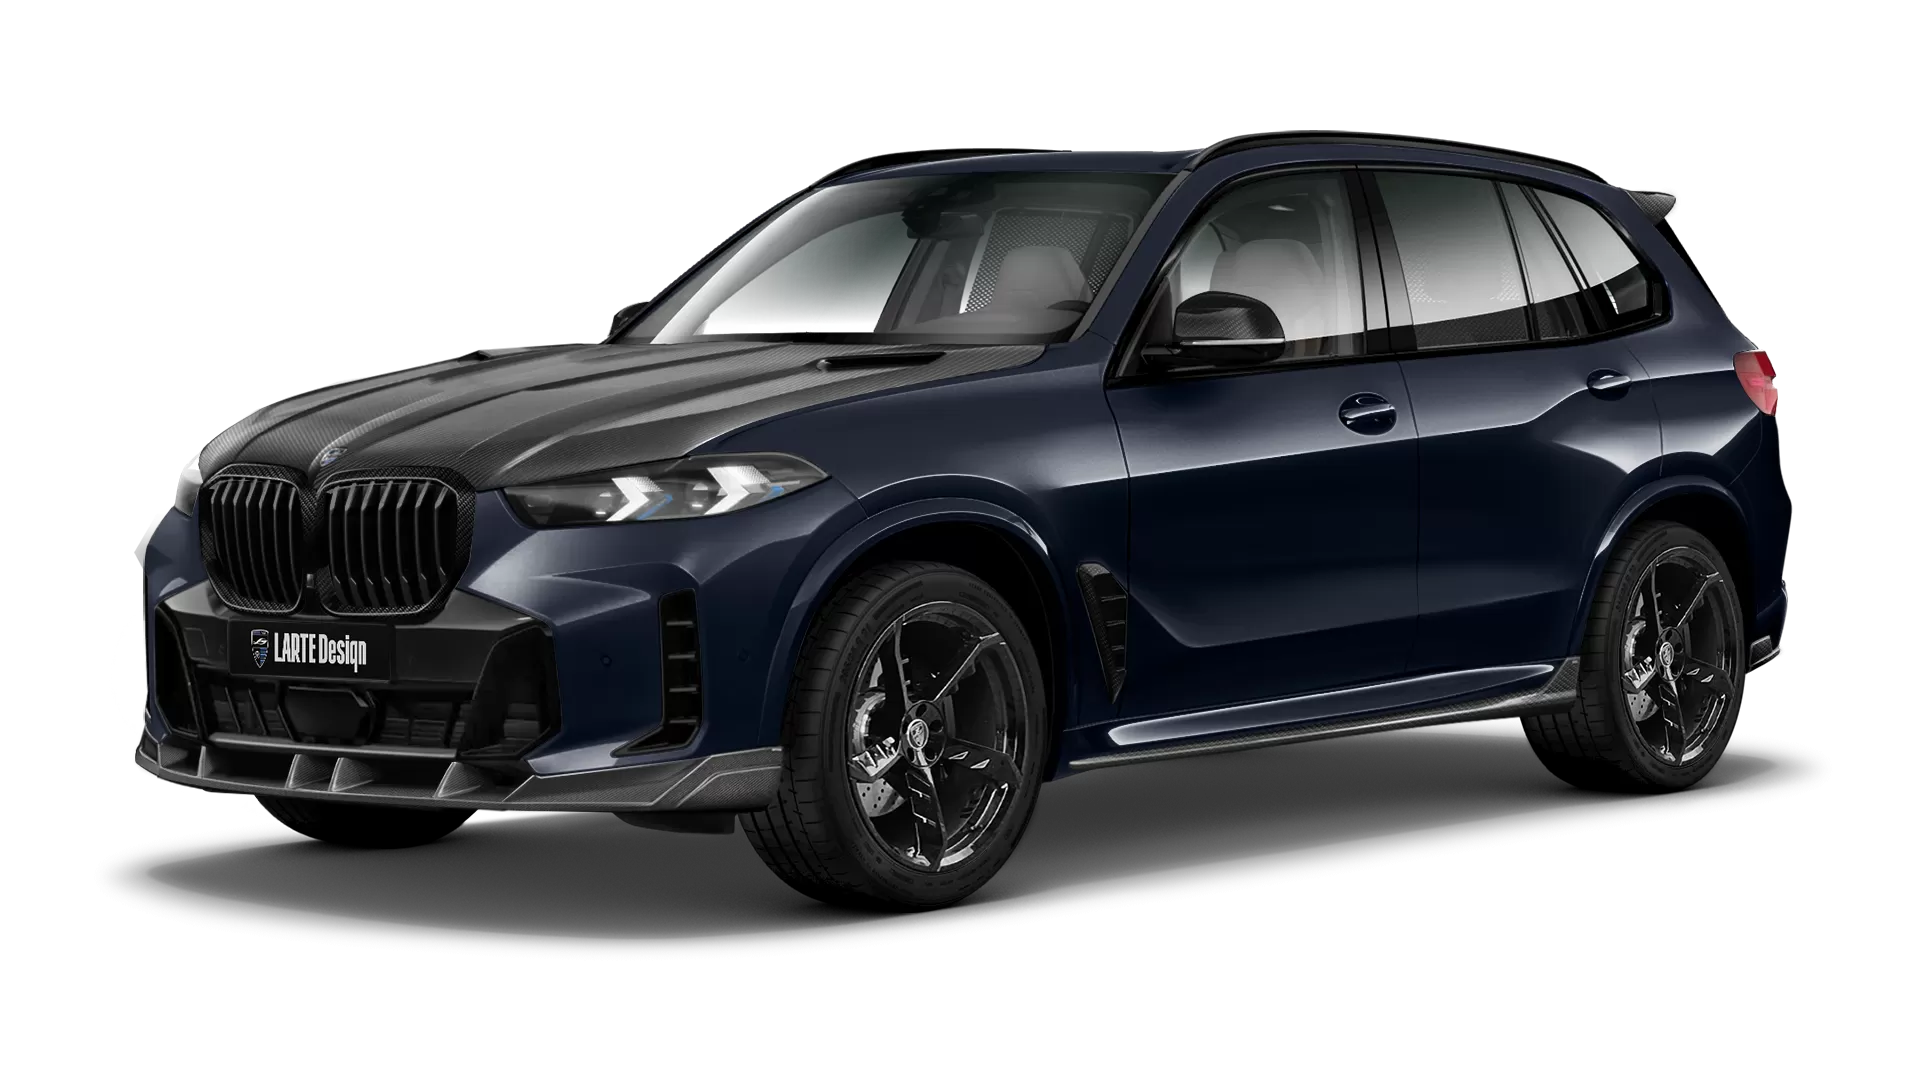 BMW X5 G05 LCI Facelift with carbon body kit: front view shown in Black Carbon